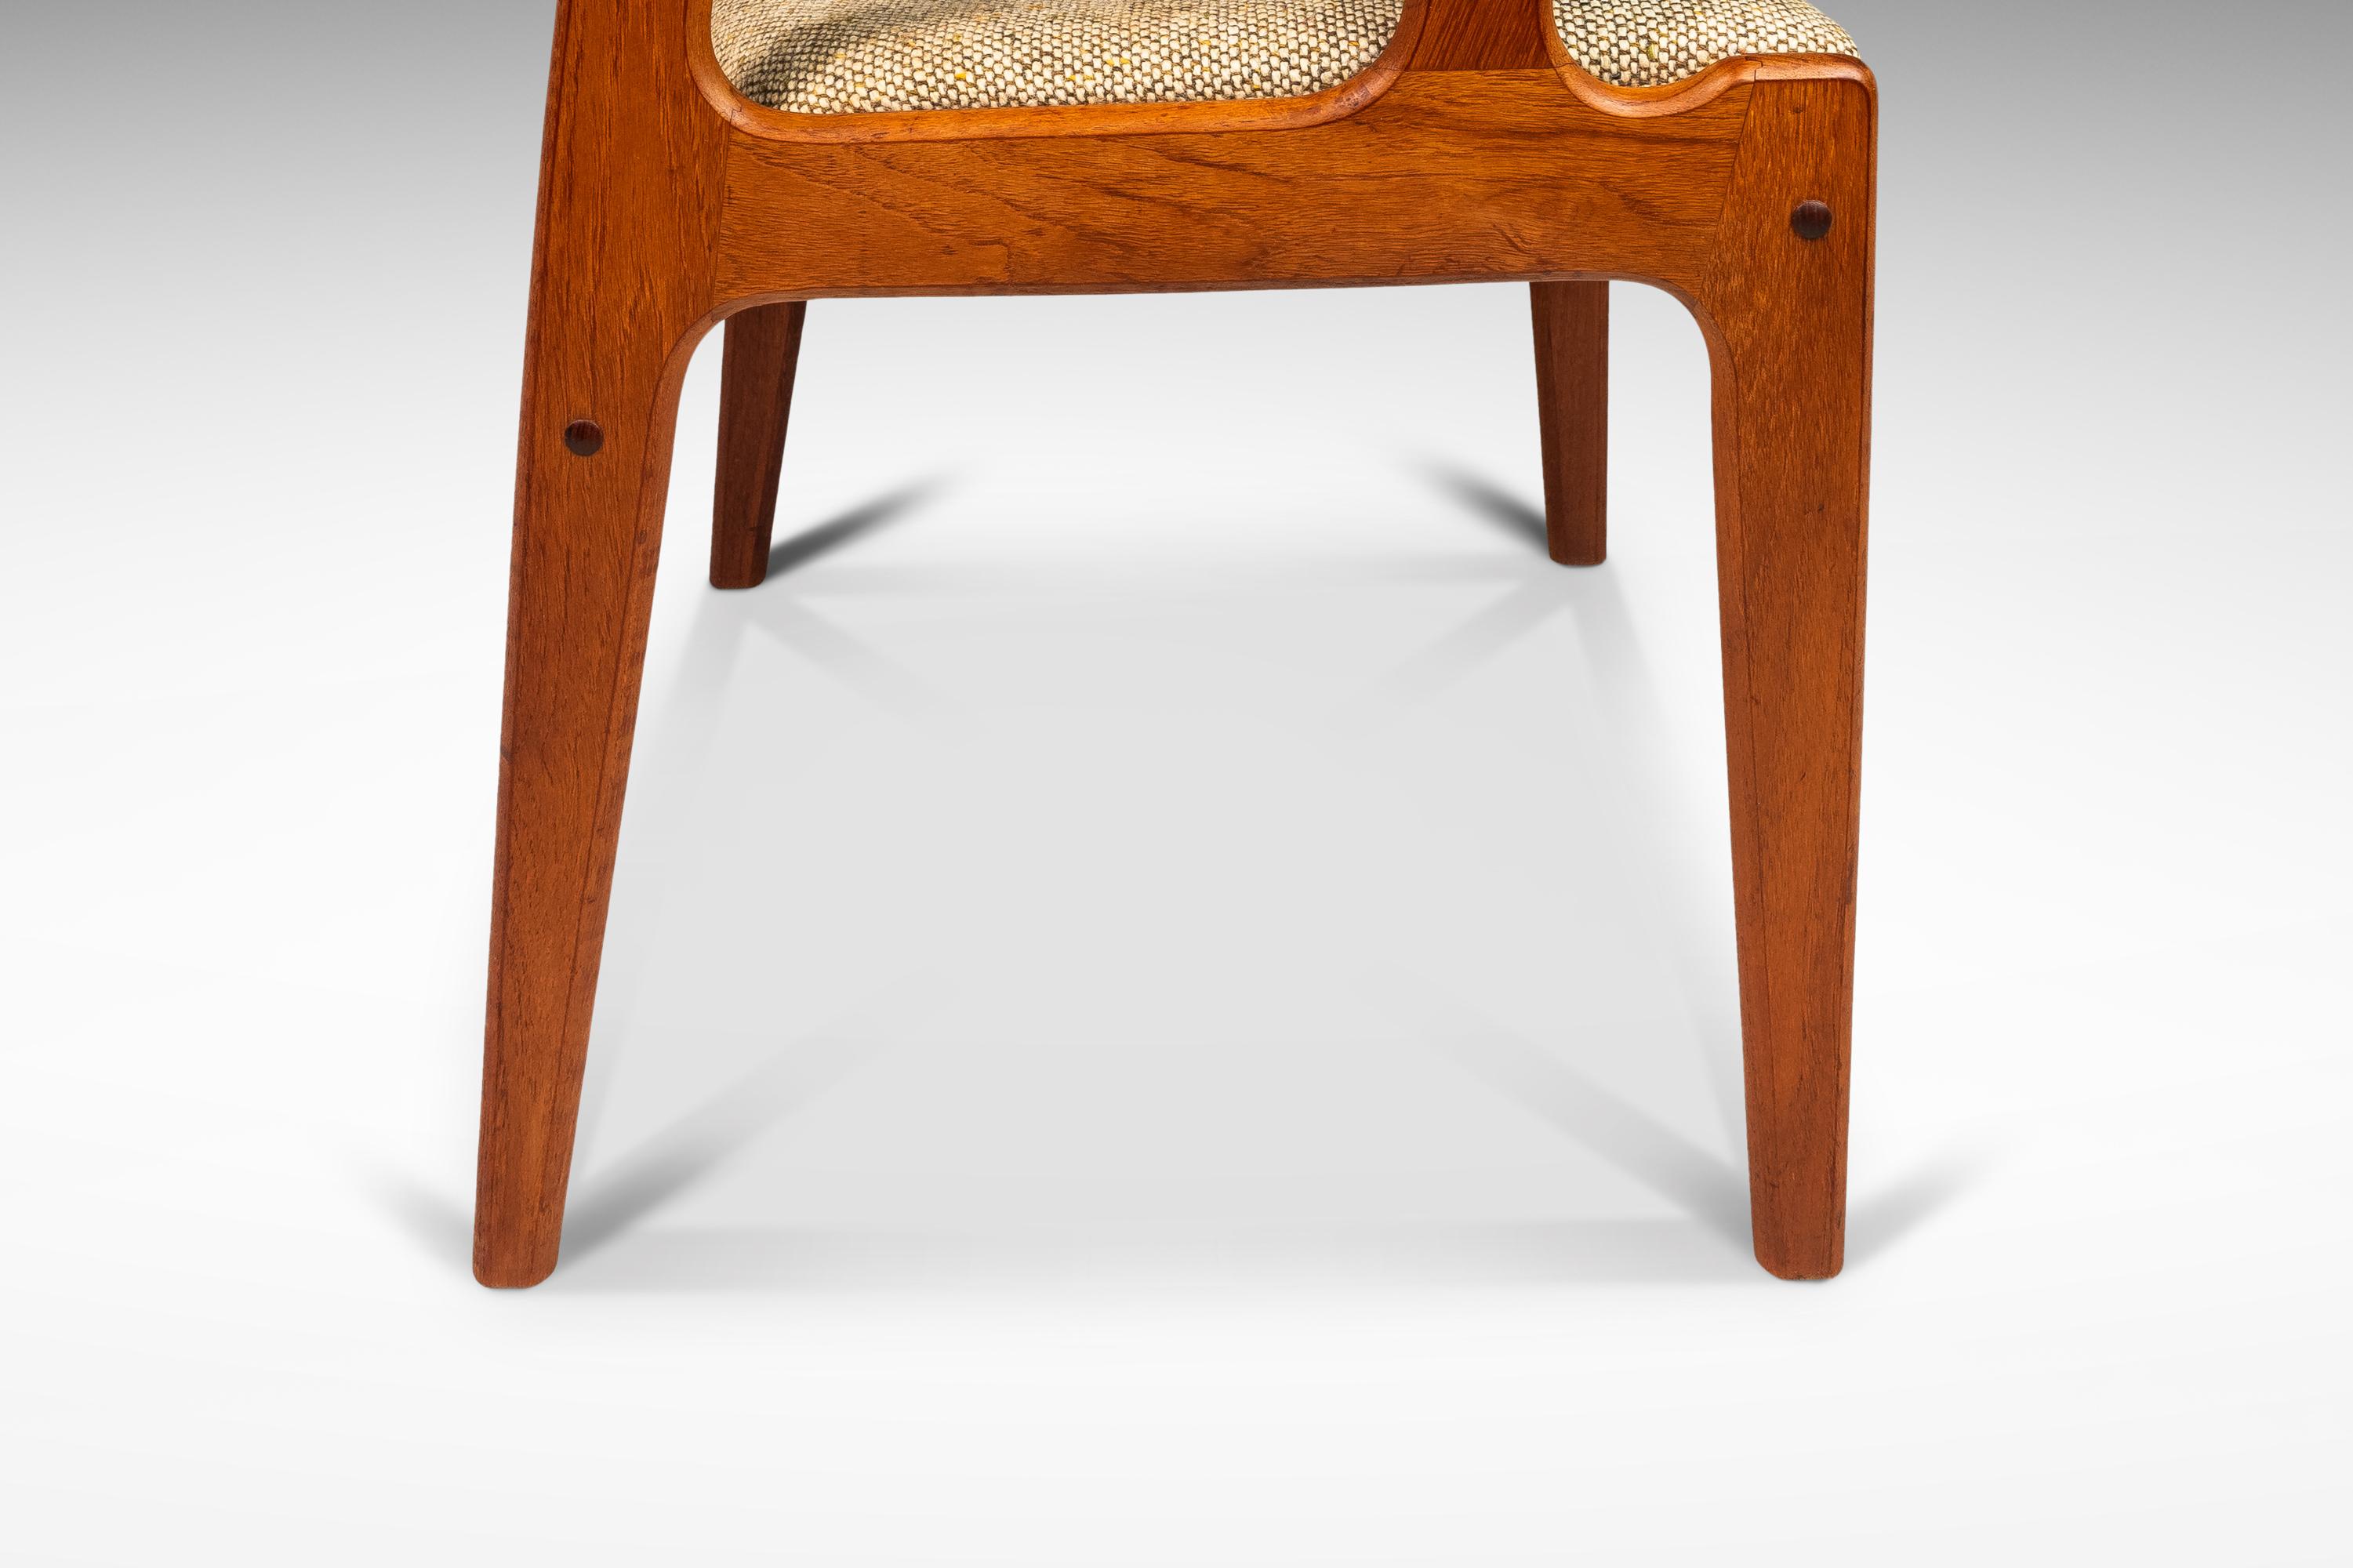 Danish Mid-Century Arm Chair in Solid Teak & Original Fabric by D-Scan, c. 1970s For Sale 9